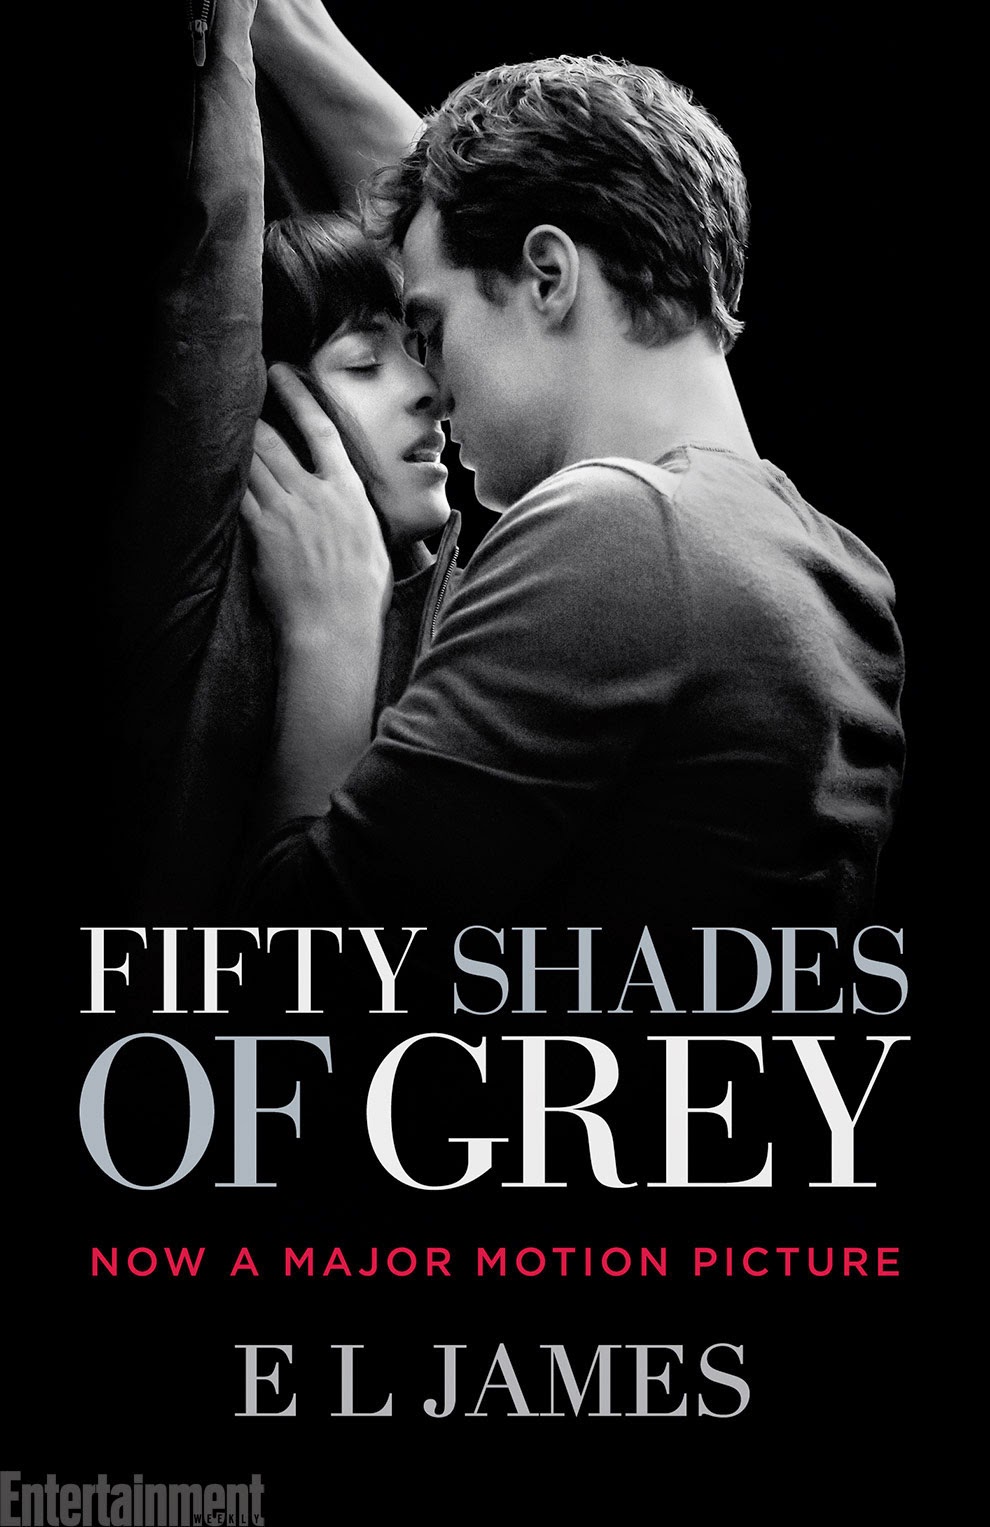 http://discover.halifaxpubliclibraries.ca/?q=title:fifty%20shades%20of%20grey